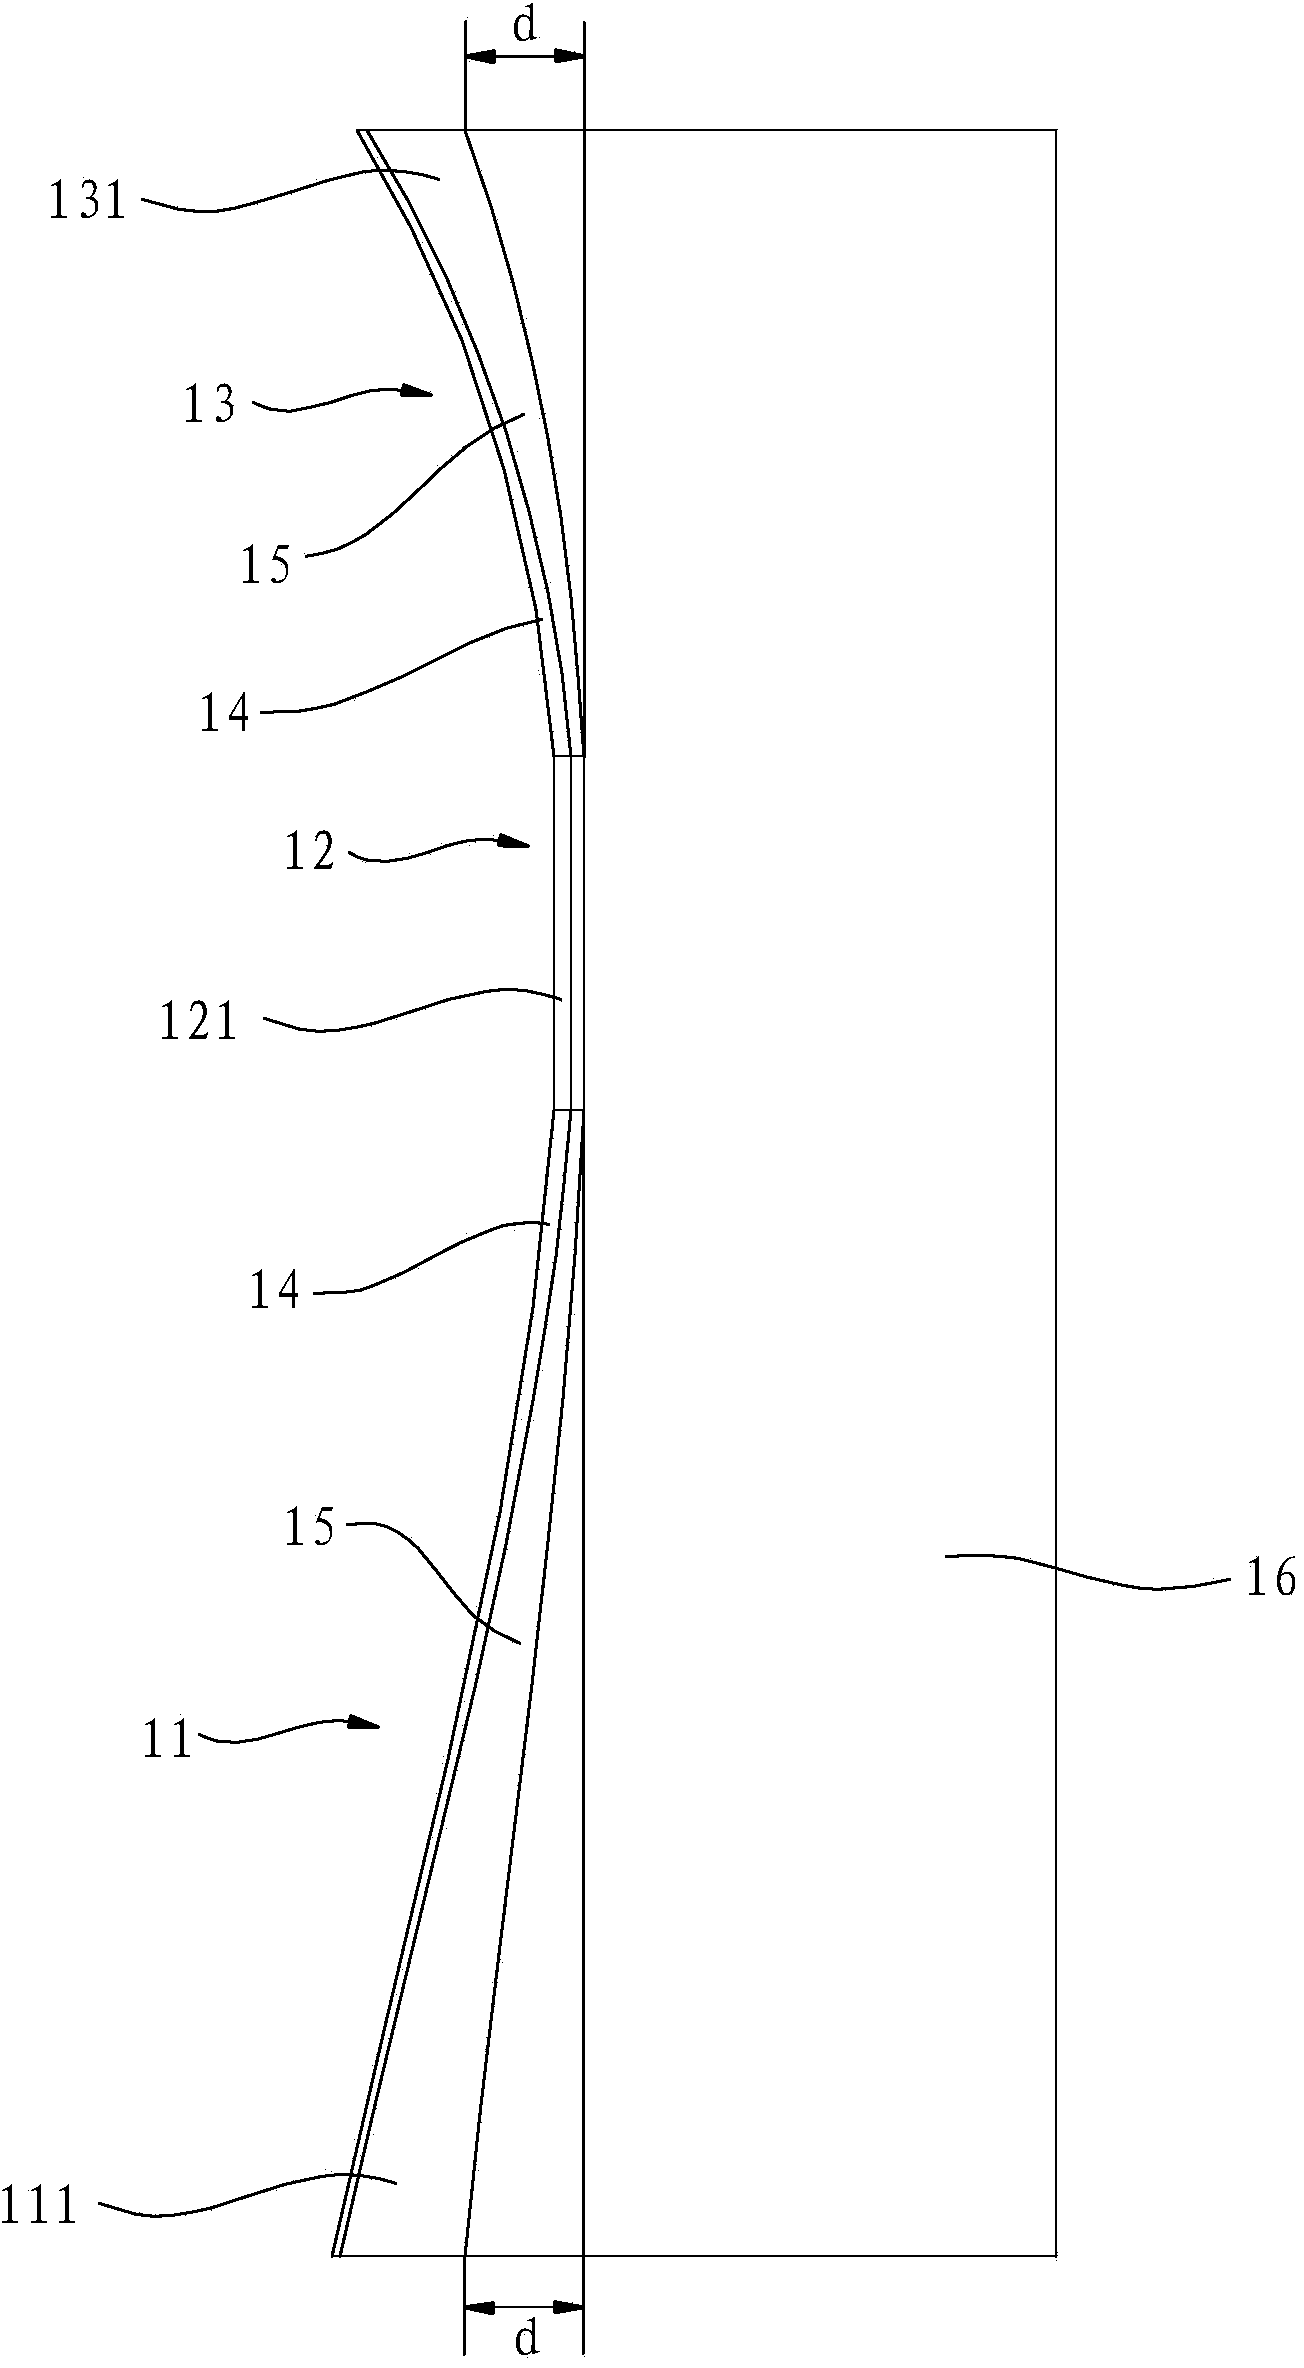 Volute tongue structure of fan for range hood